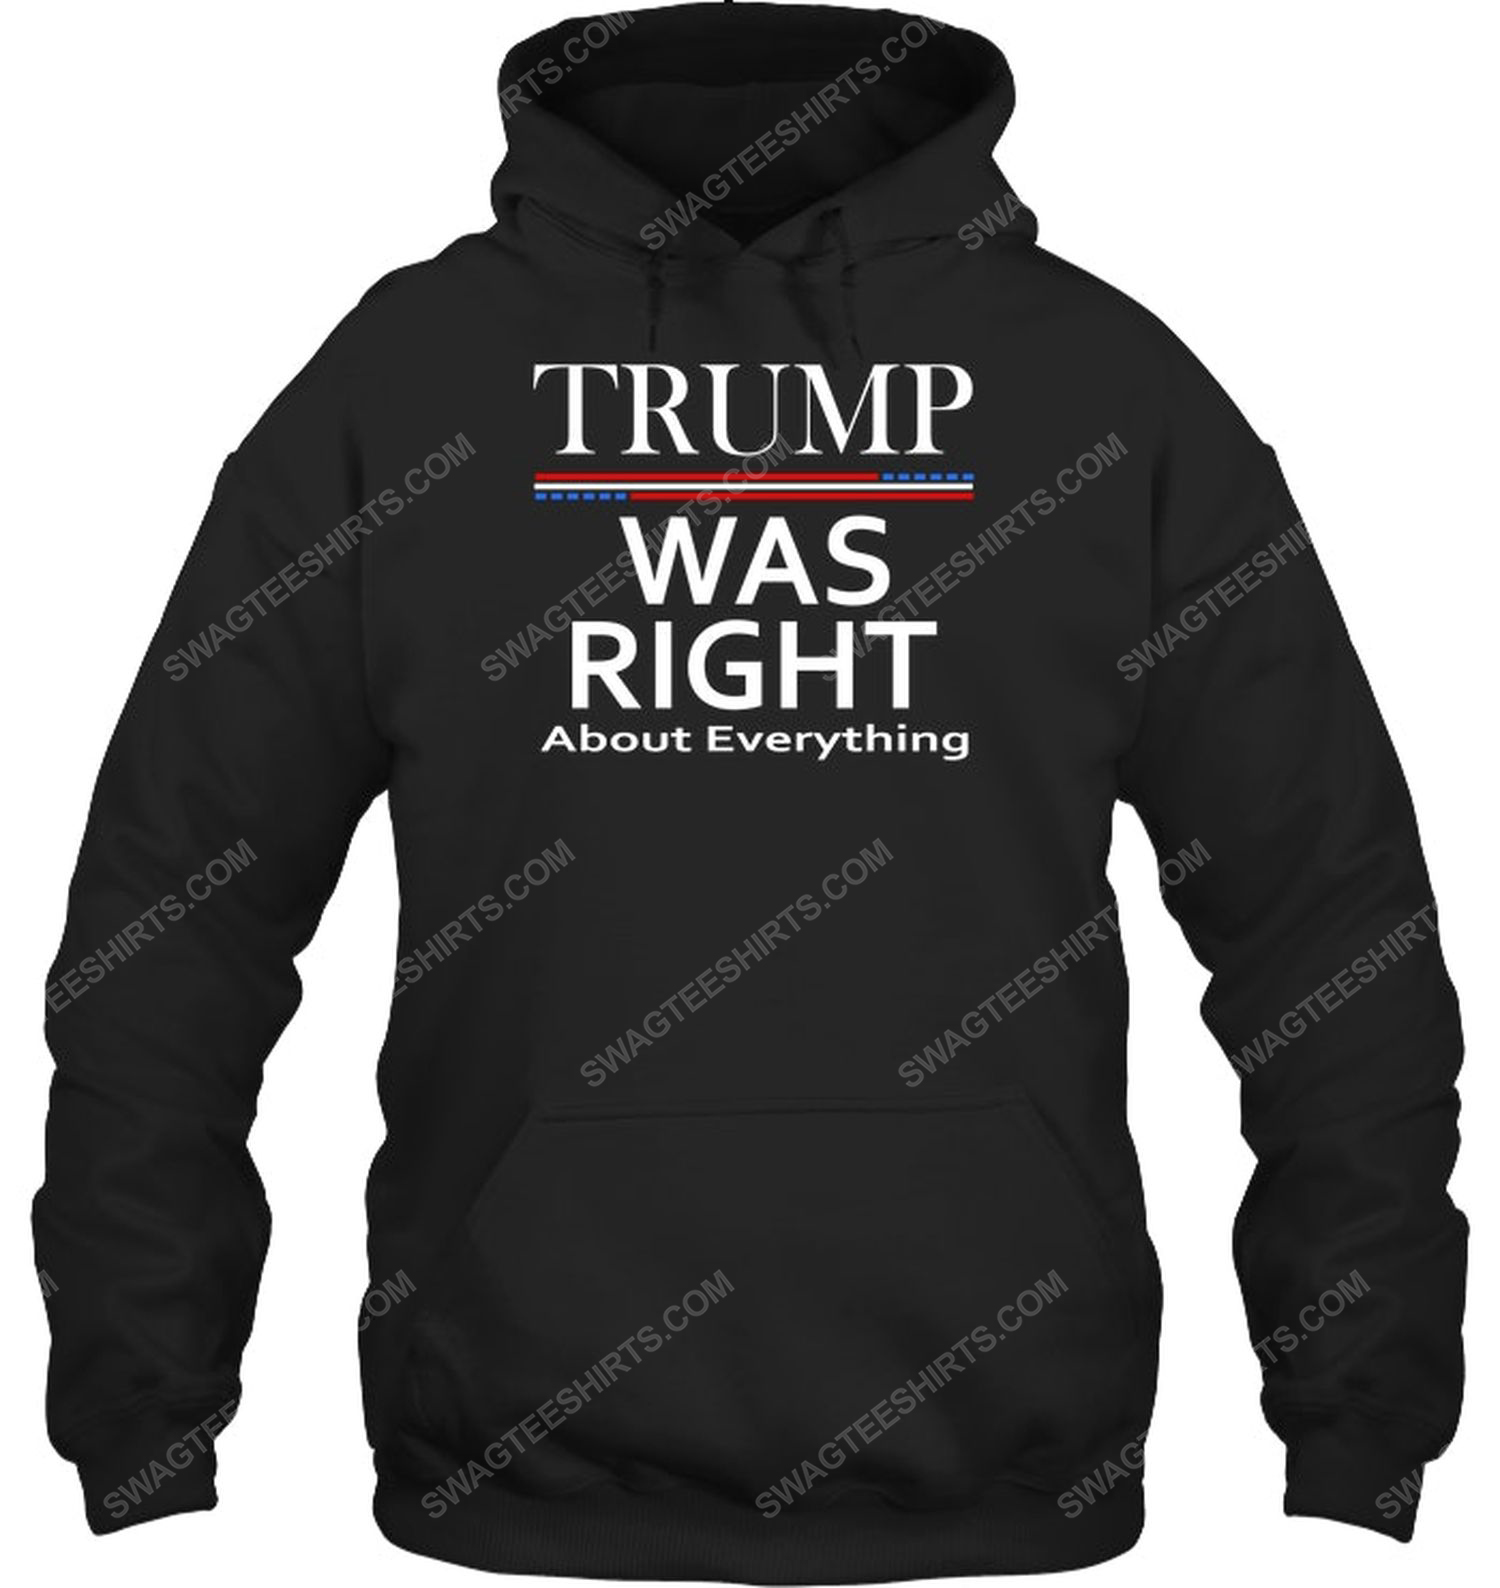 Trump was right about everything political hoodie